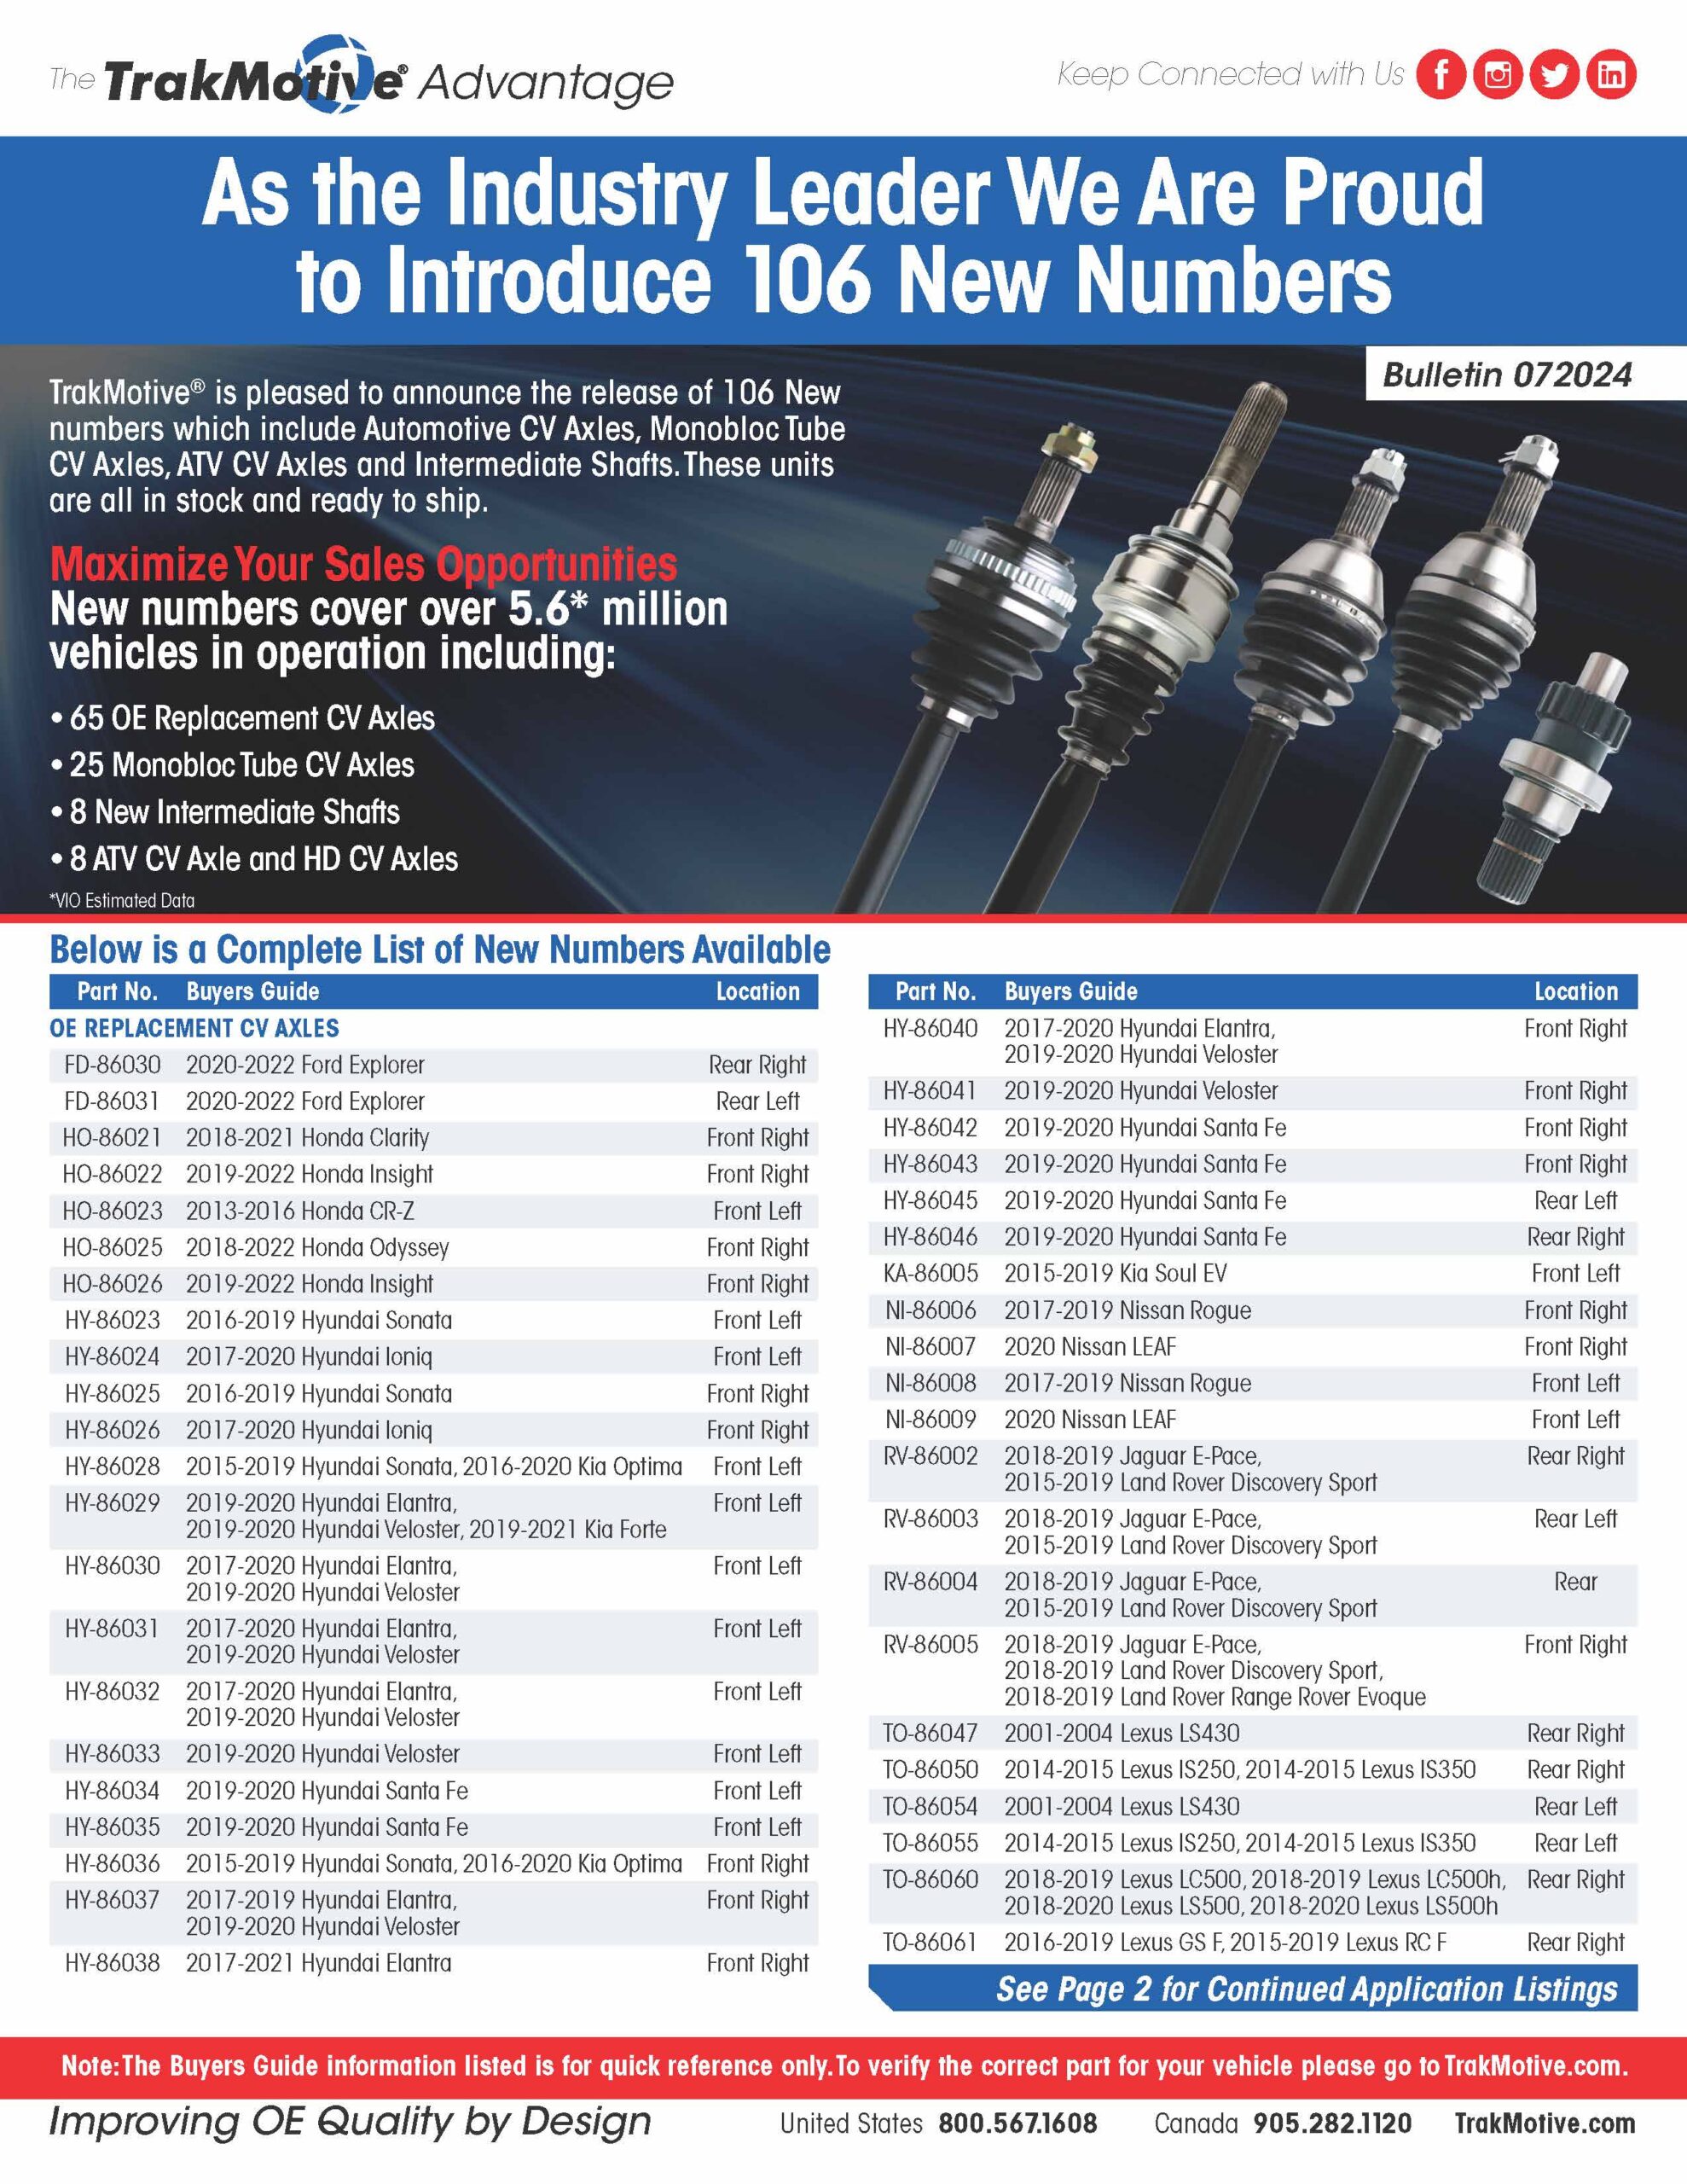 0/2024: TrakMotive Adds 106 New CV Axle Numbers